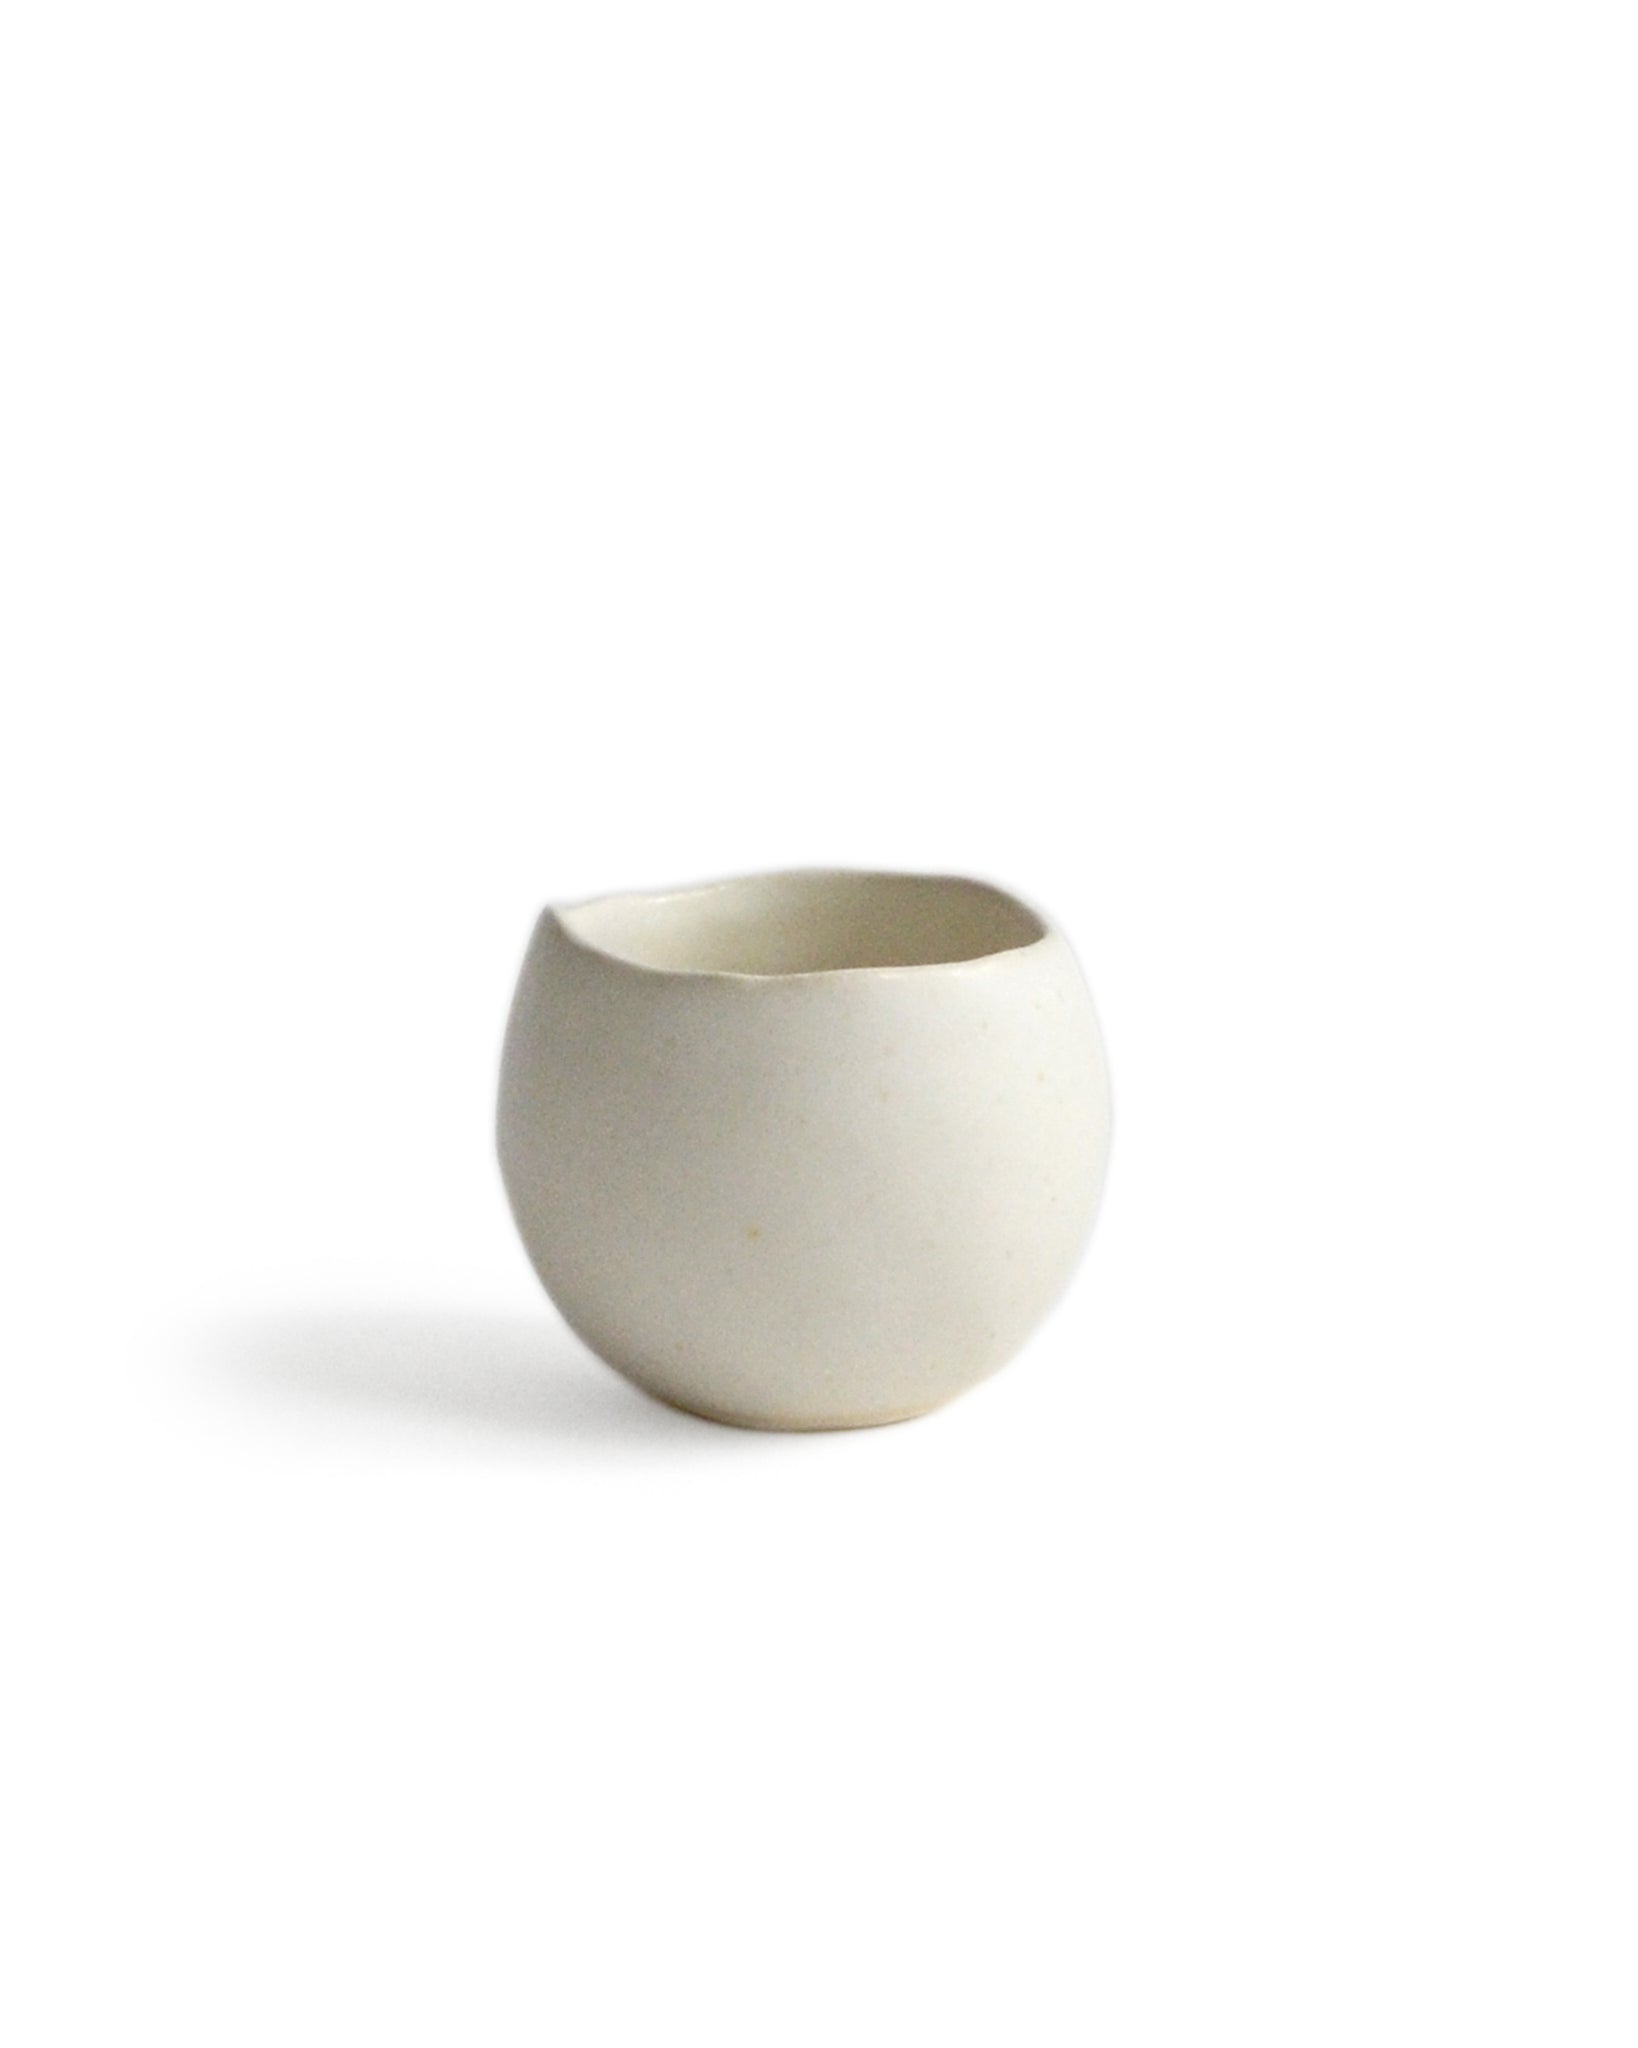 Round white ceramic cup handcrafted by Keisuke Iwata against white background